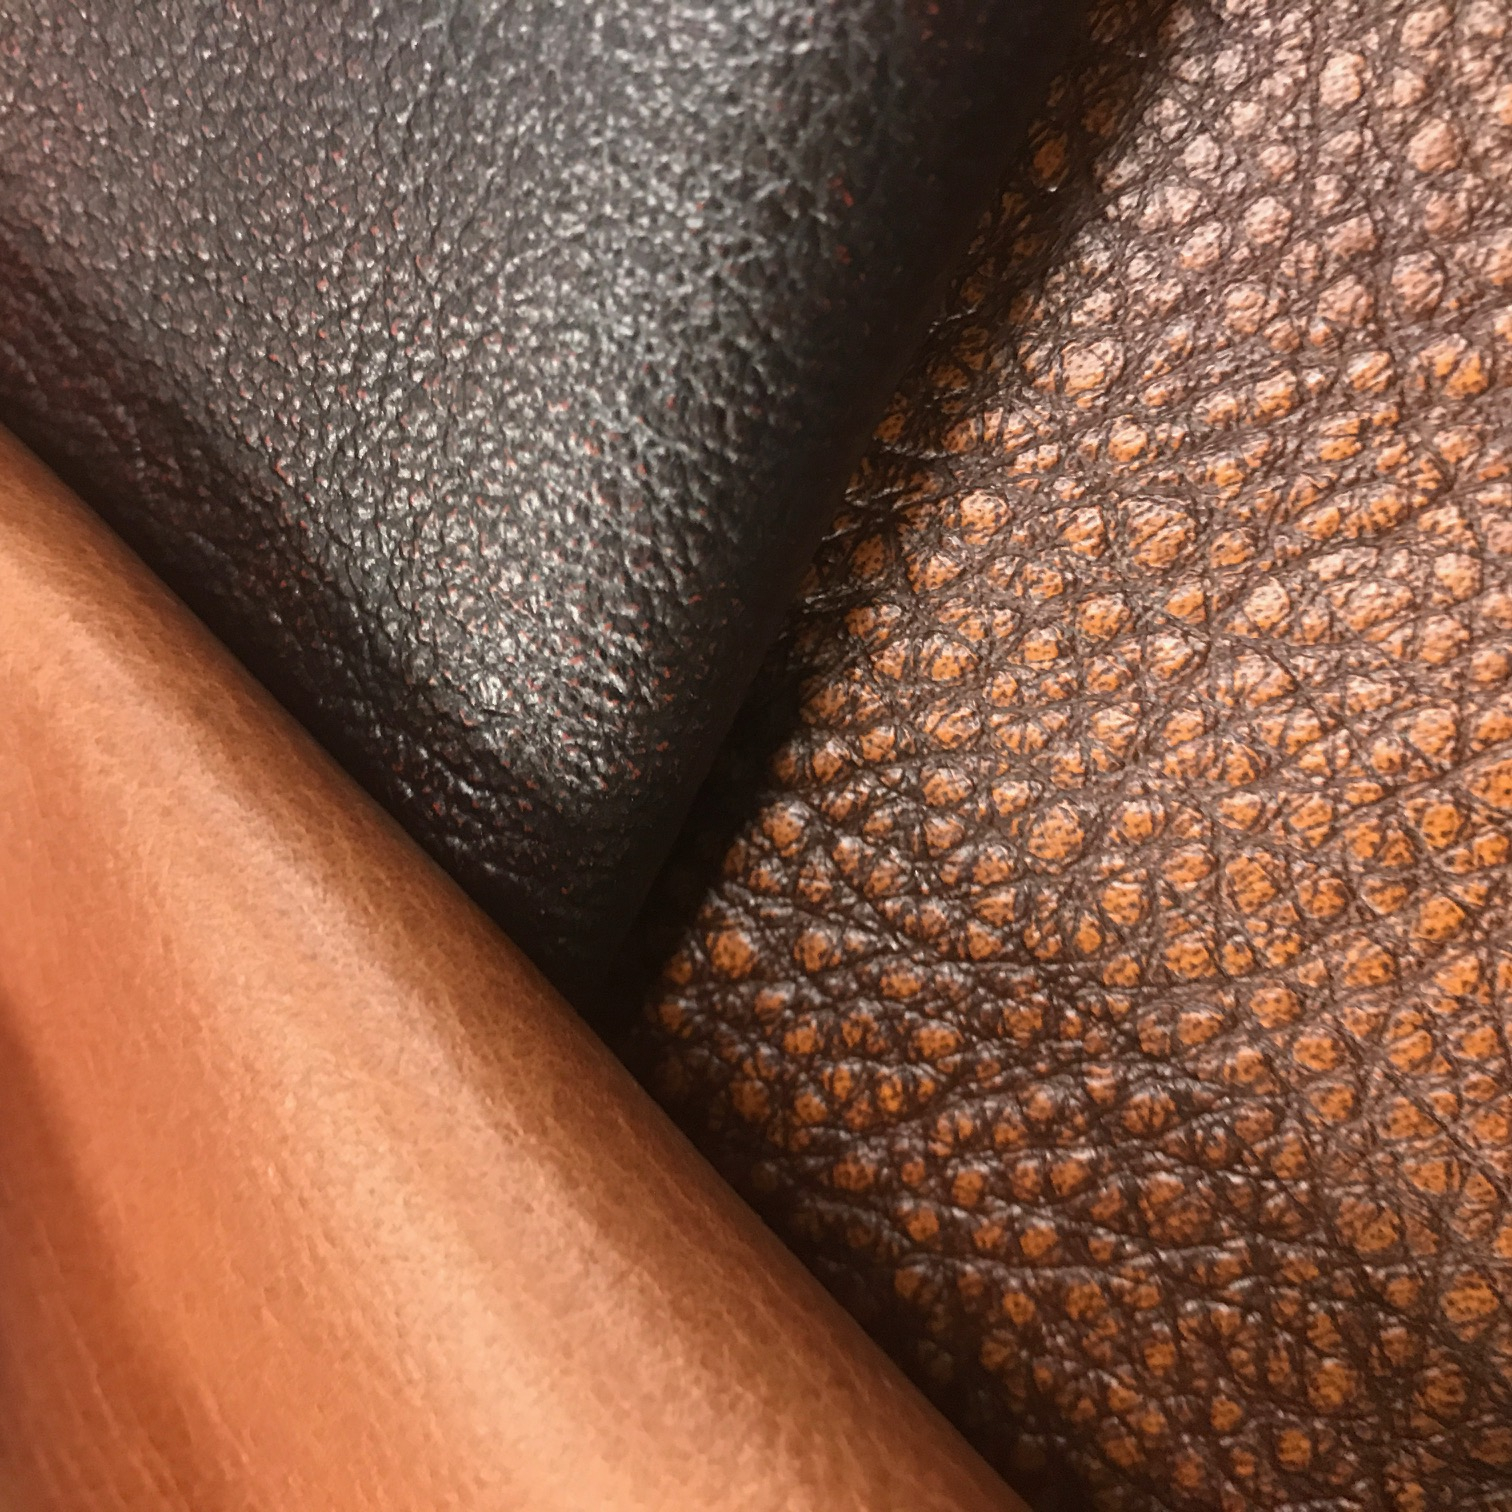 Pamplona Leather Collection